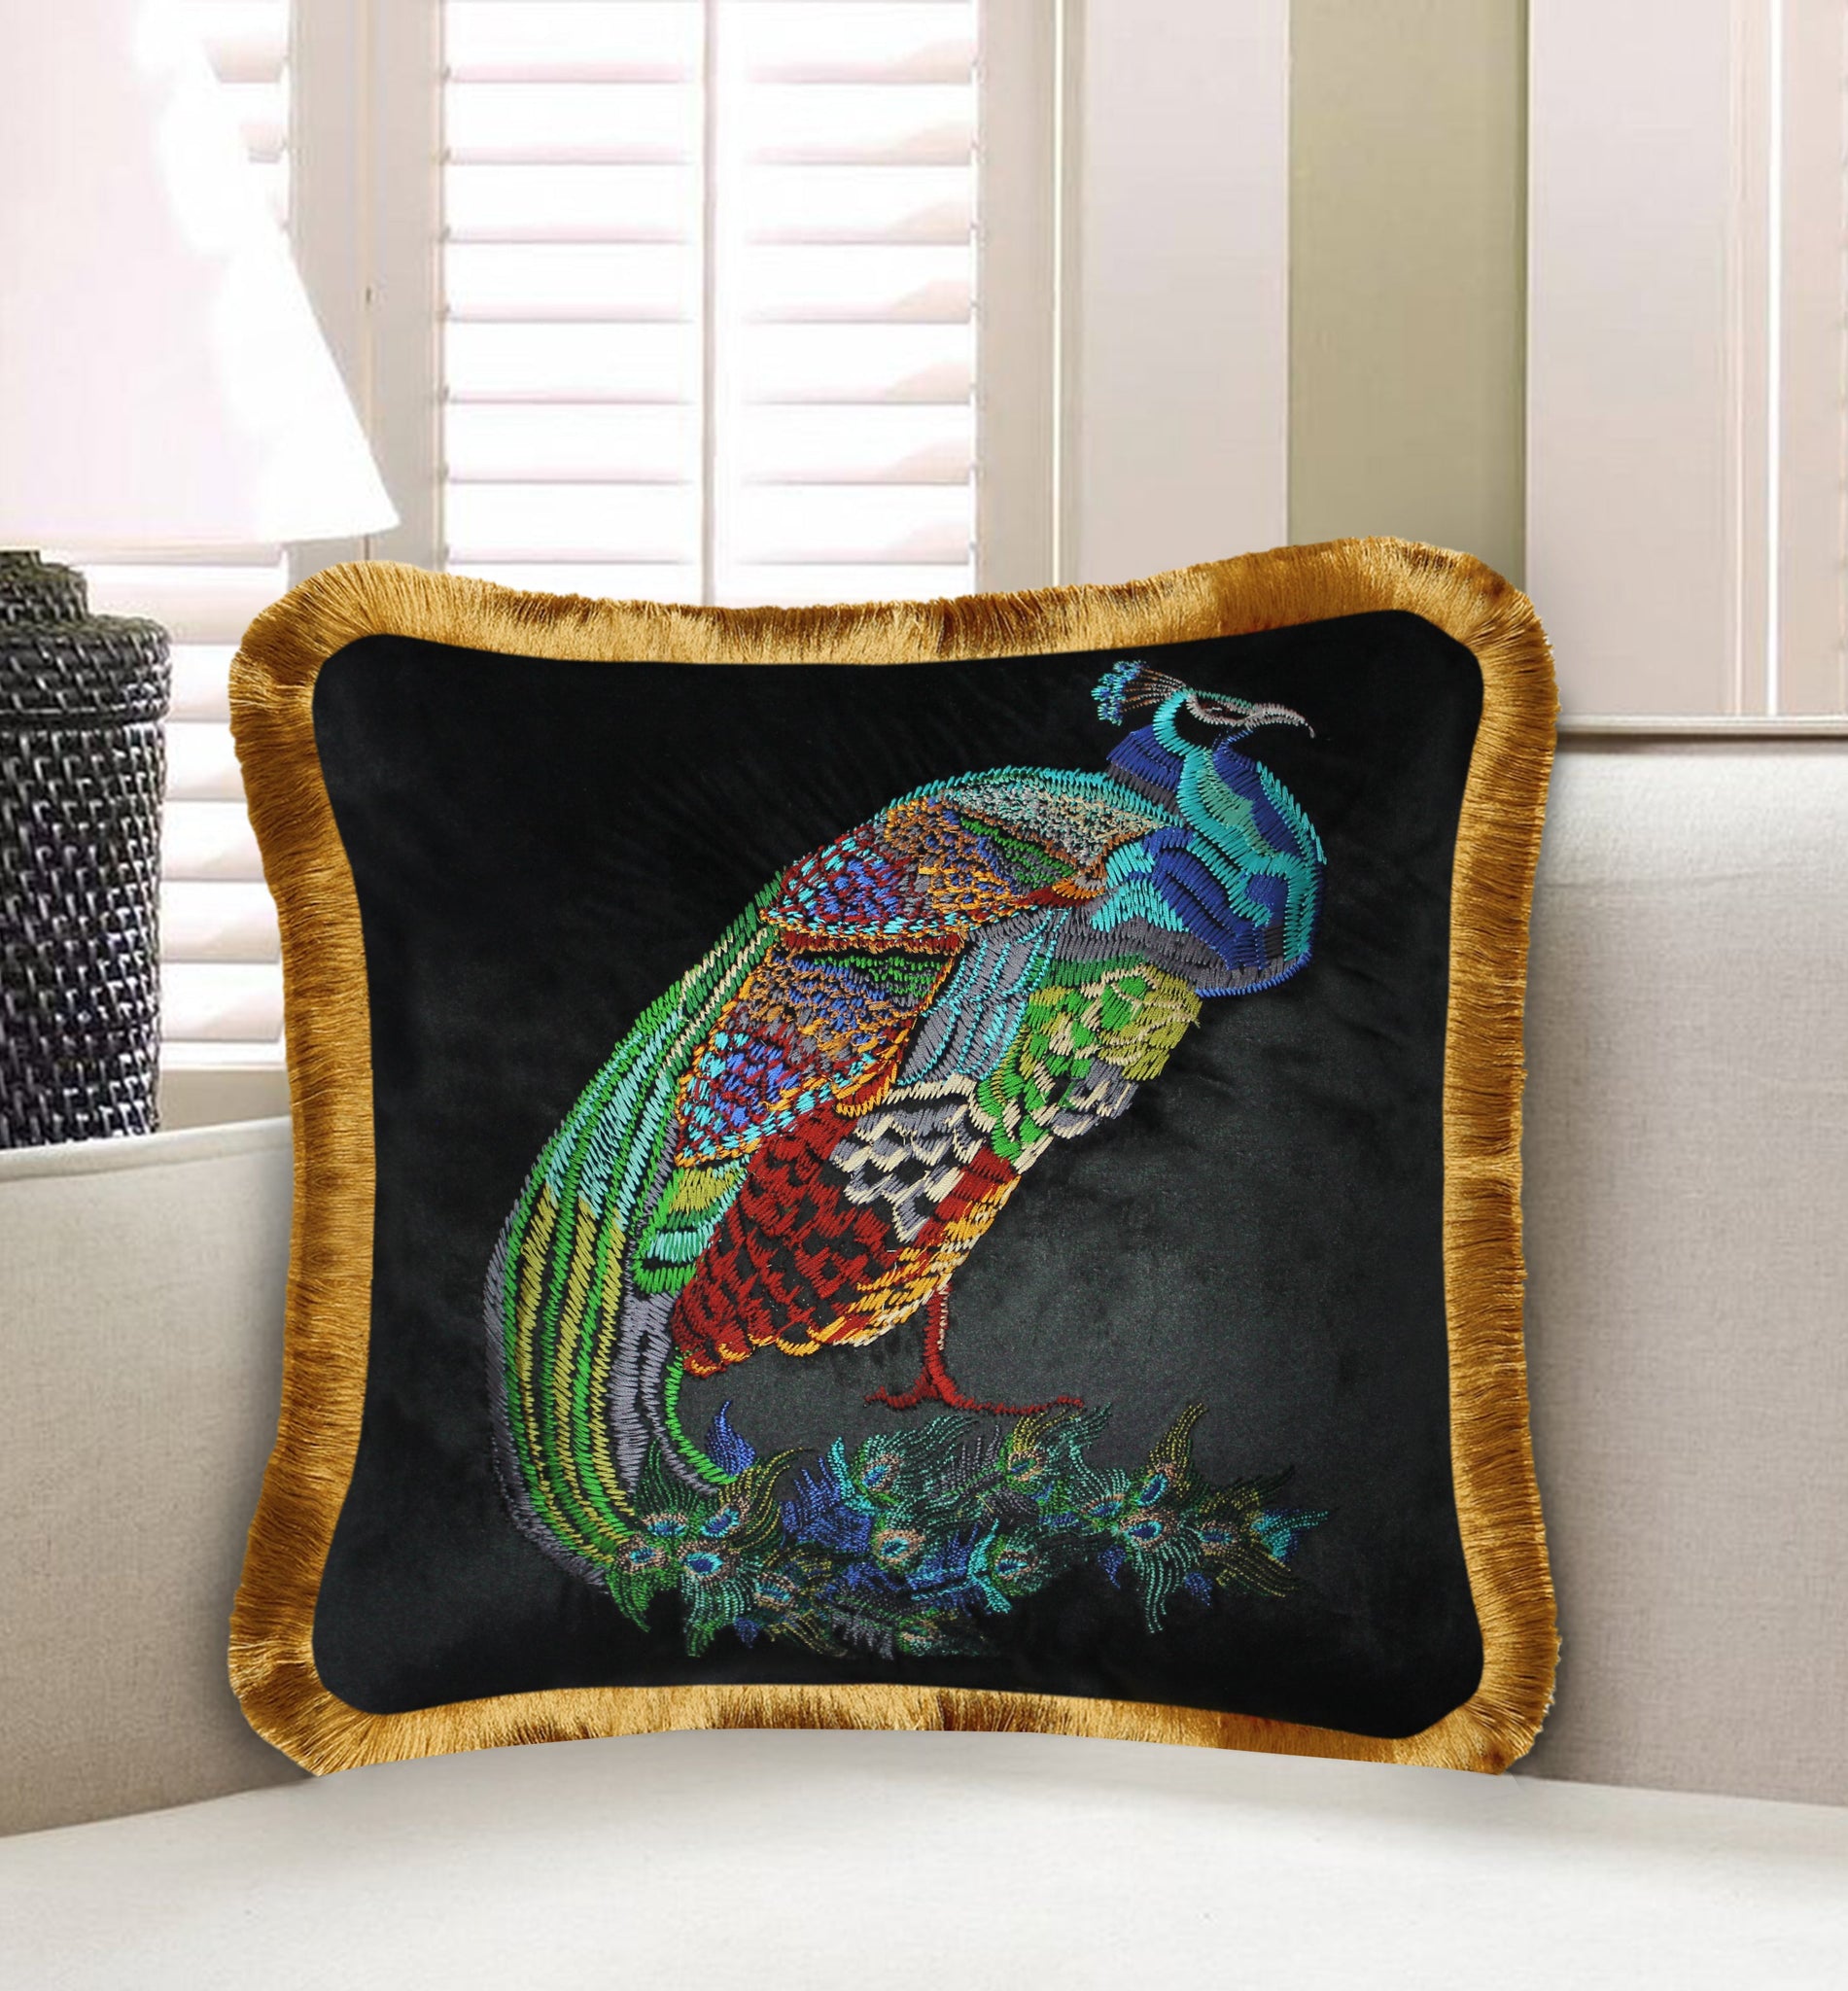  Velvet Cushion Cover Colorful Peacock Decorative Pillowcase Embroidery Decor Throw Pillow for Sofa Chair Bedroom Living Room Black 45x45 cm (18x18 Inches).